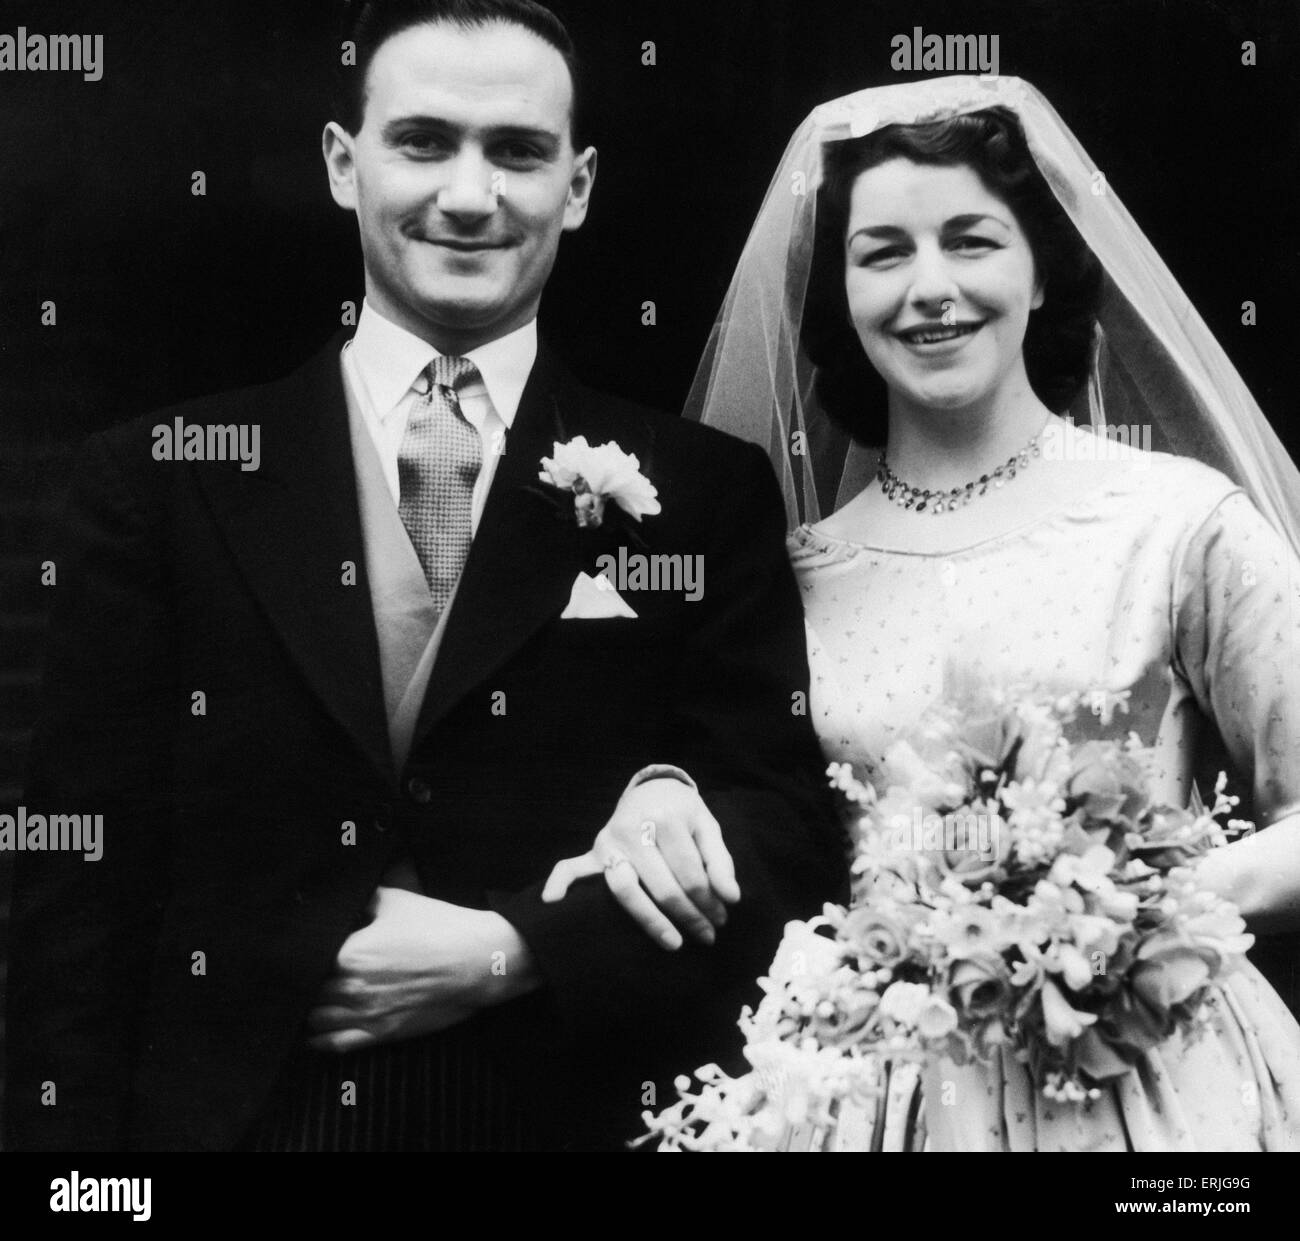 John Vollam Morton younger son of H.V Morton the Birmingham Journalist who became famous for his books on travel. (Picture) John Vollam Morton on his wedding day with wife former Miss Anne Kenrick Lewis daughter of Mr and Mrs. J. Kenrick Lewis. of Alderbrook Road, Solihull. 20th March 1954. Henry Vollam Morton Stock Photo